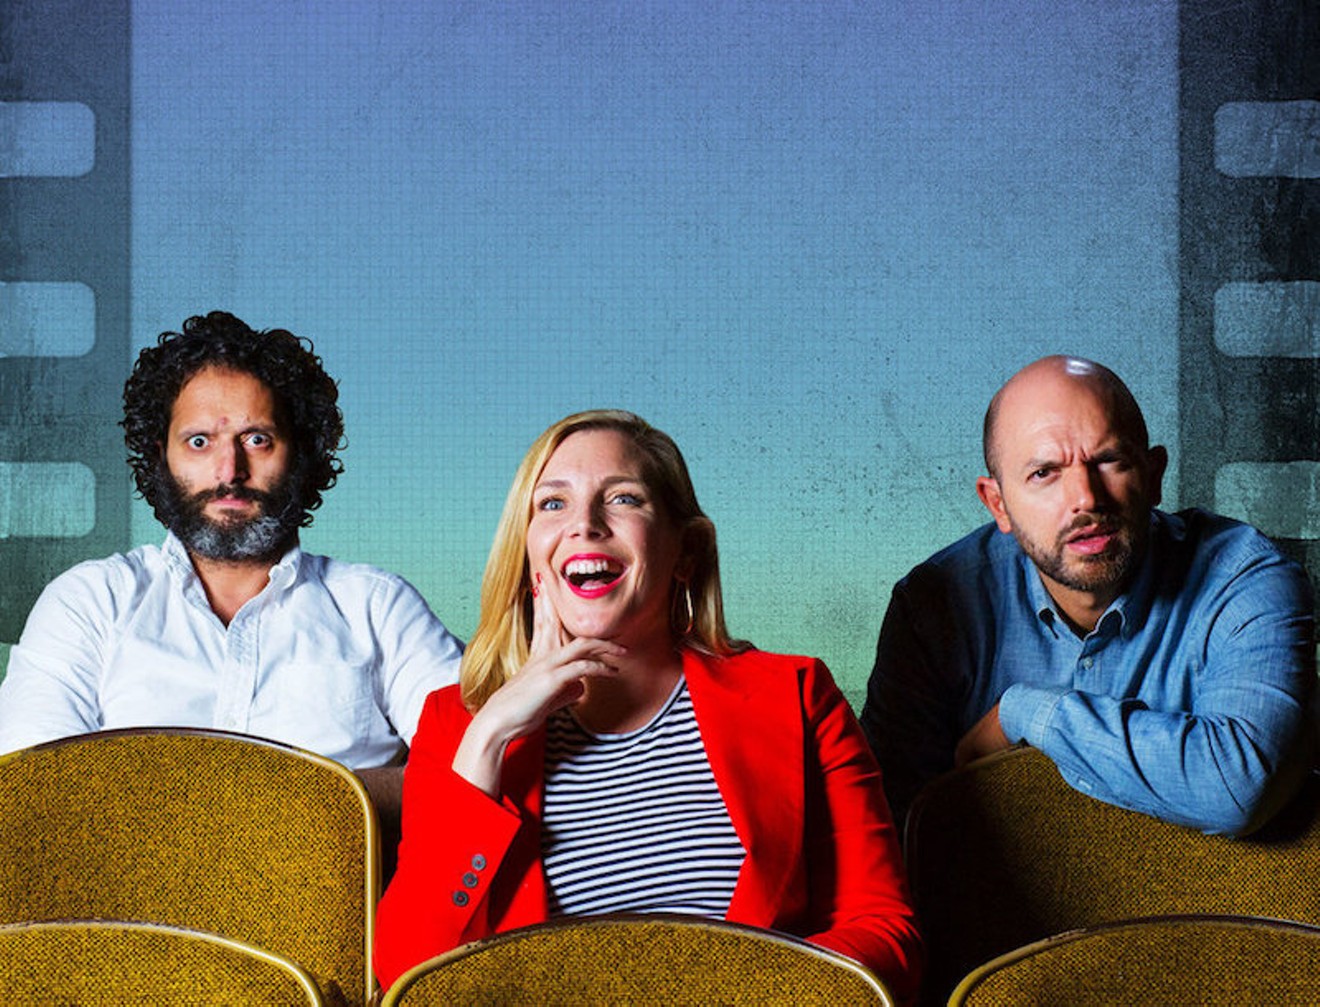 June Diane Raphael, Paul Scheer and Jason Mantzoukas of the How Did This Get Made? podcast co-headline the High Plains Comedy Festival, August 23-25.